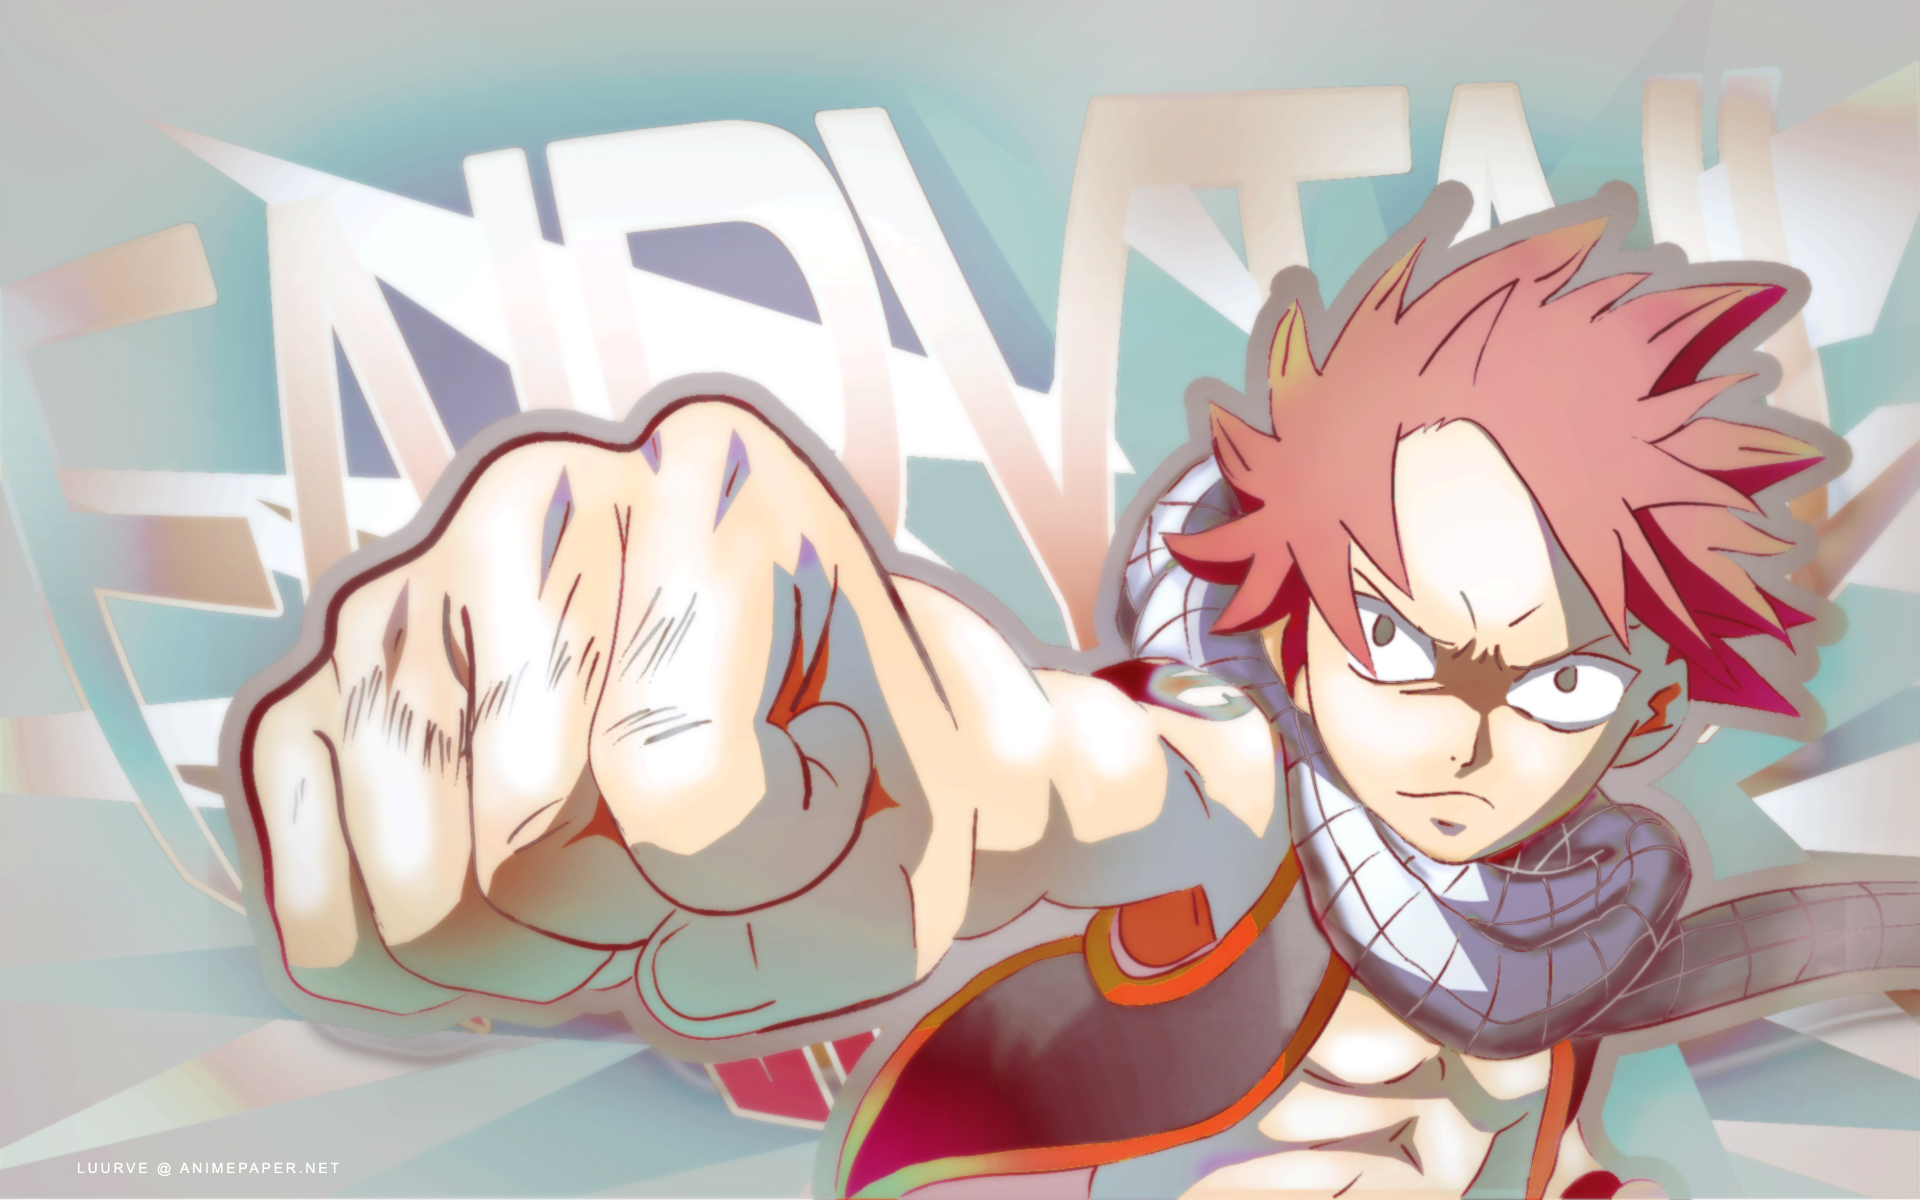 hinh nen fairy tail 14 - wallpaper free download